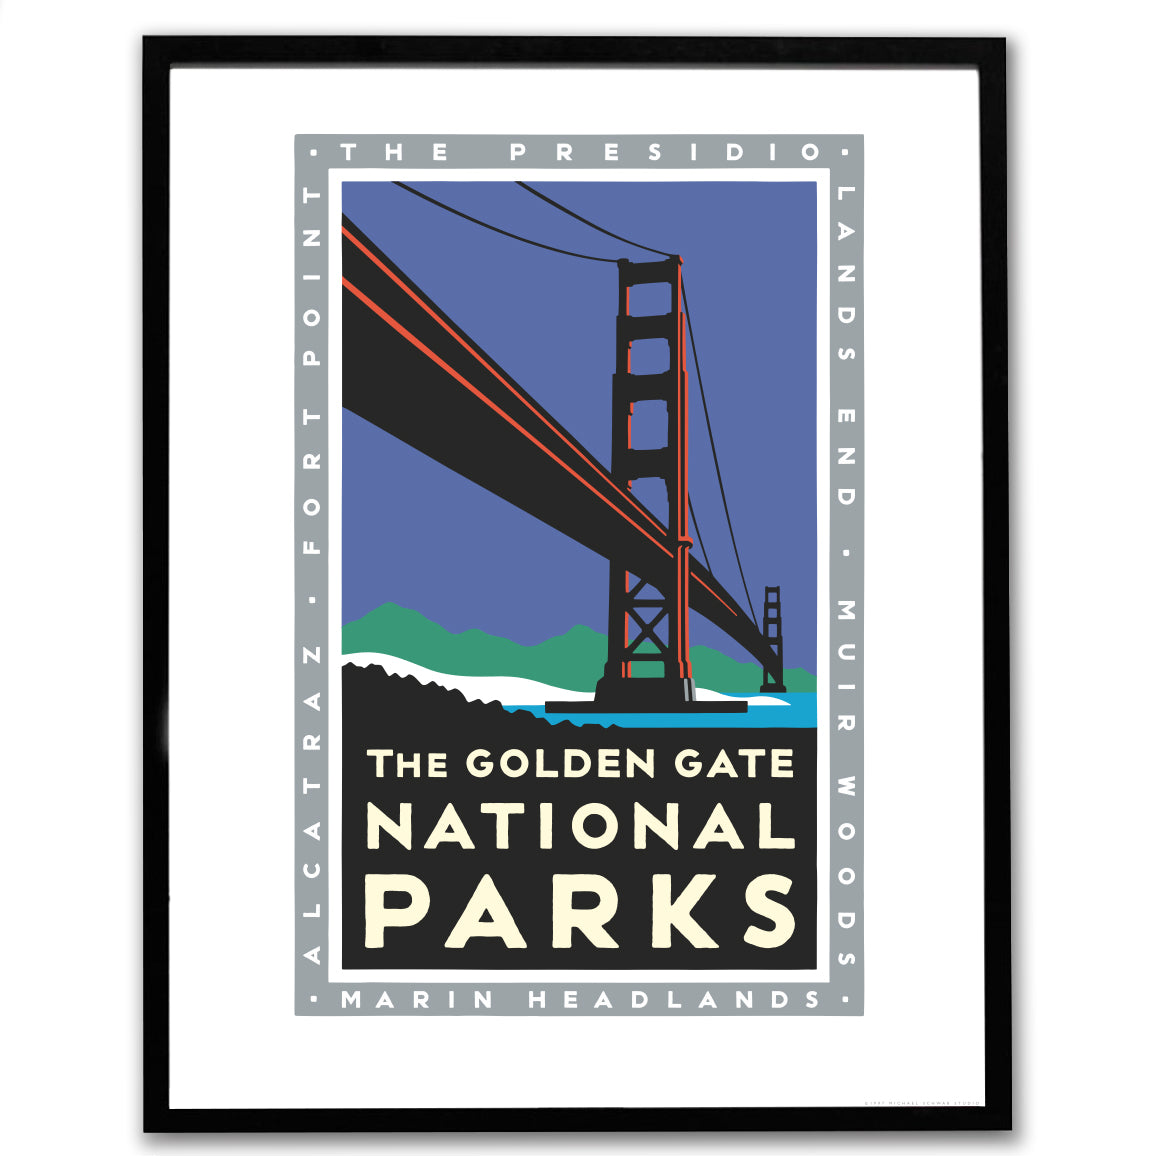 The Golden Gate National Parks Bridge giclee poster in black frame, art by Michael Schwab, the Golden Gate National Parks Conservancy